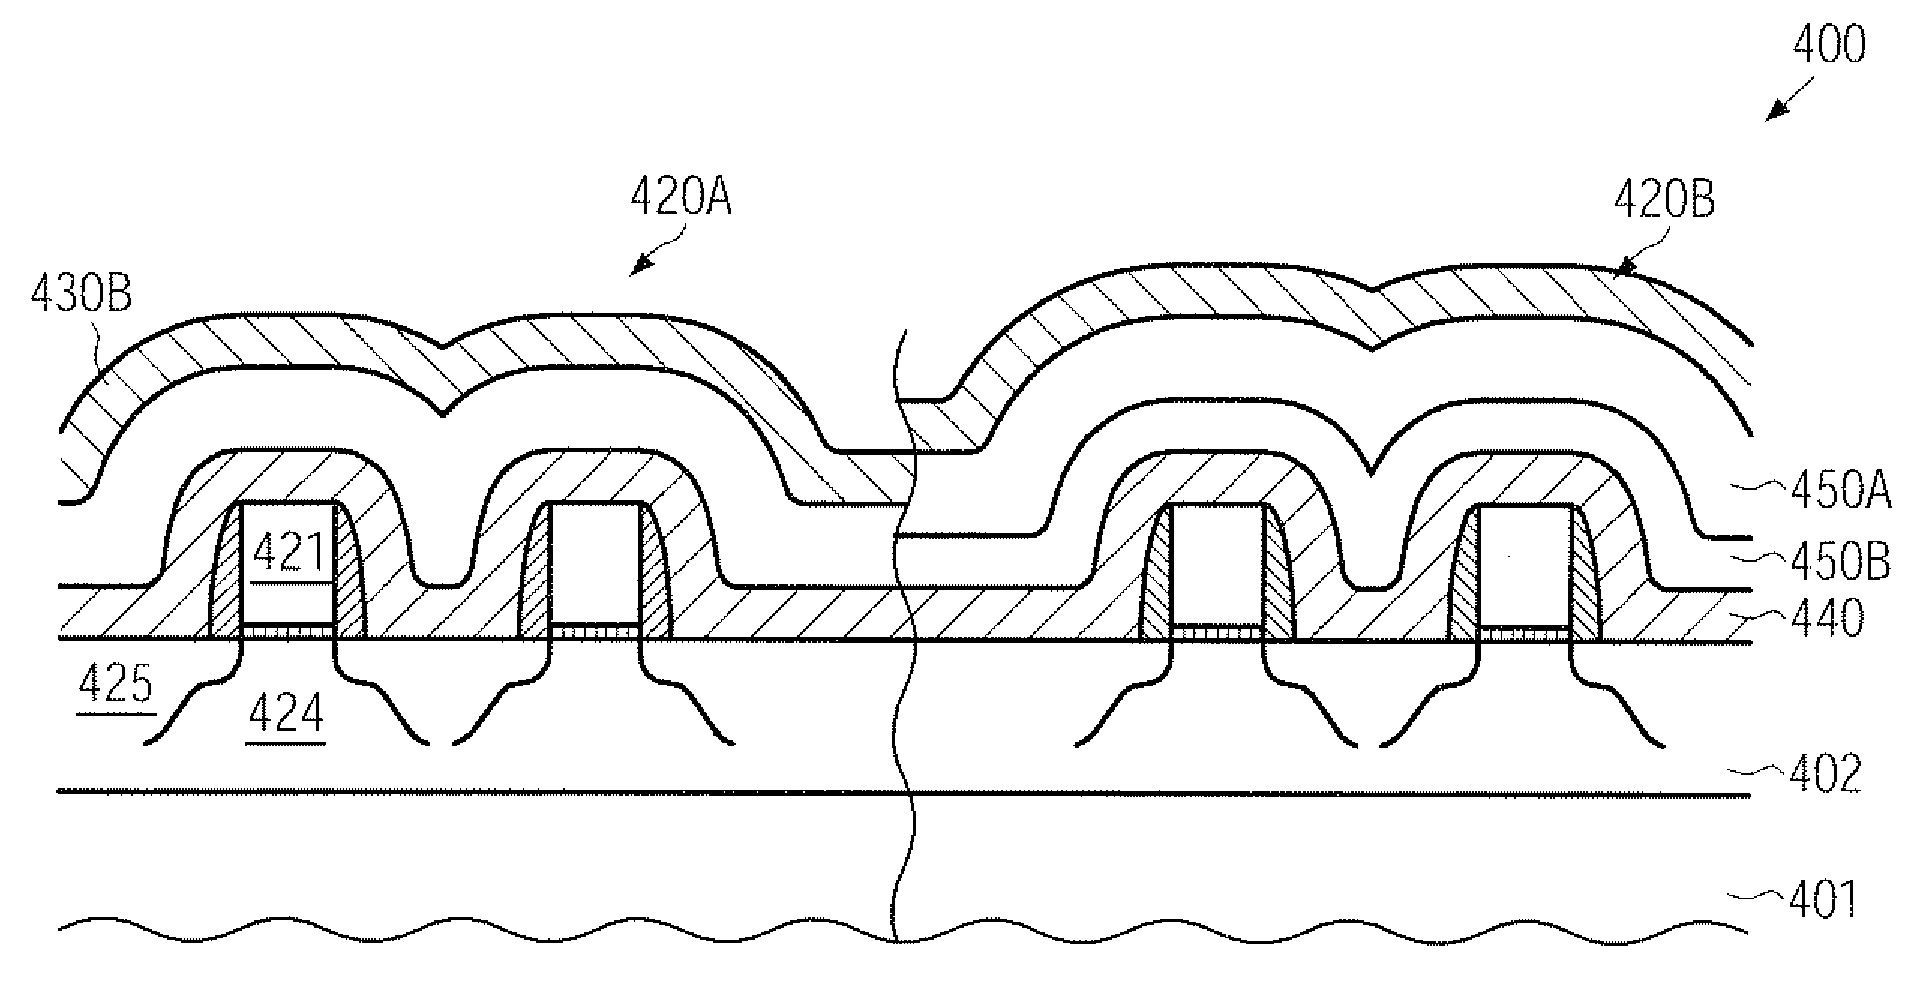 Interlayer dielectric material in a semiconductor device comprising stressed layers with an intermediate buffer material